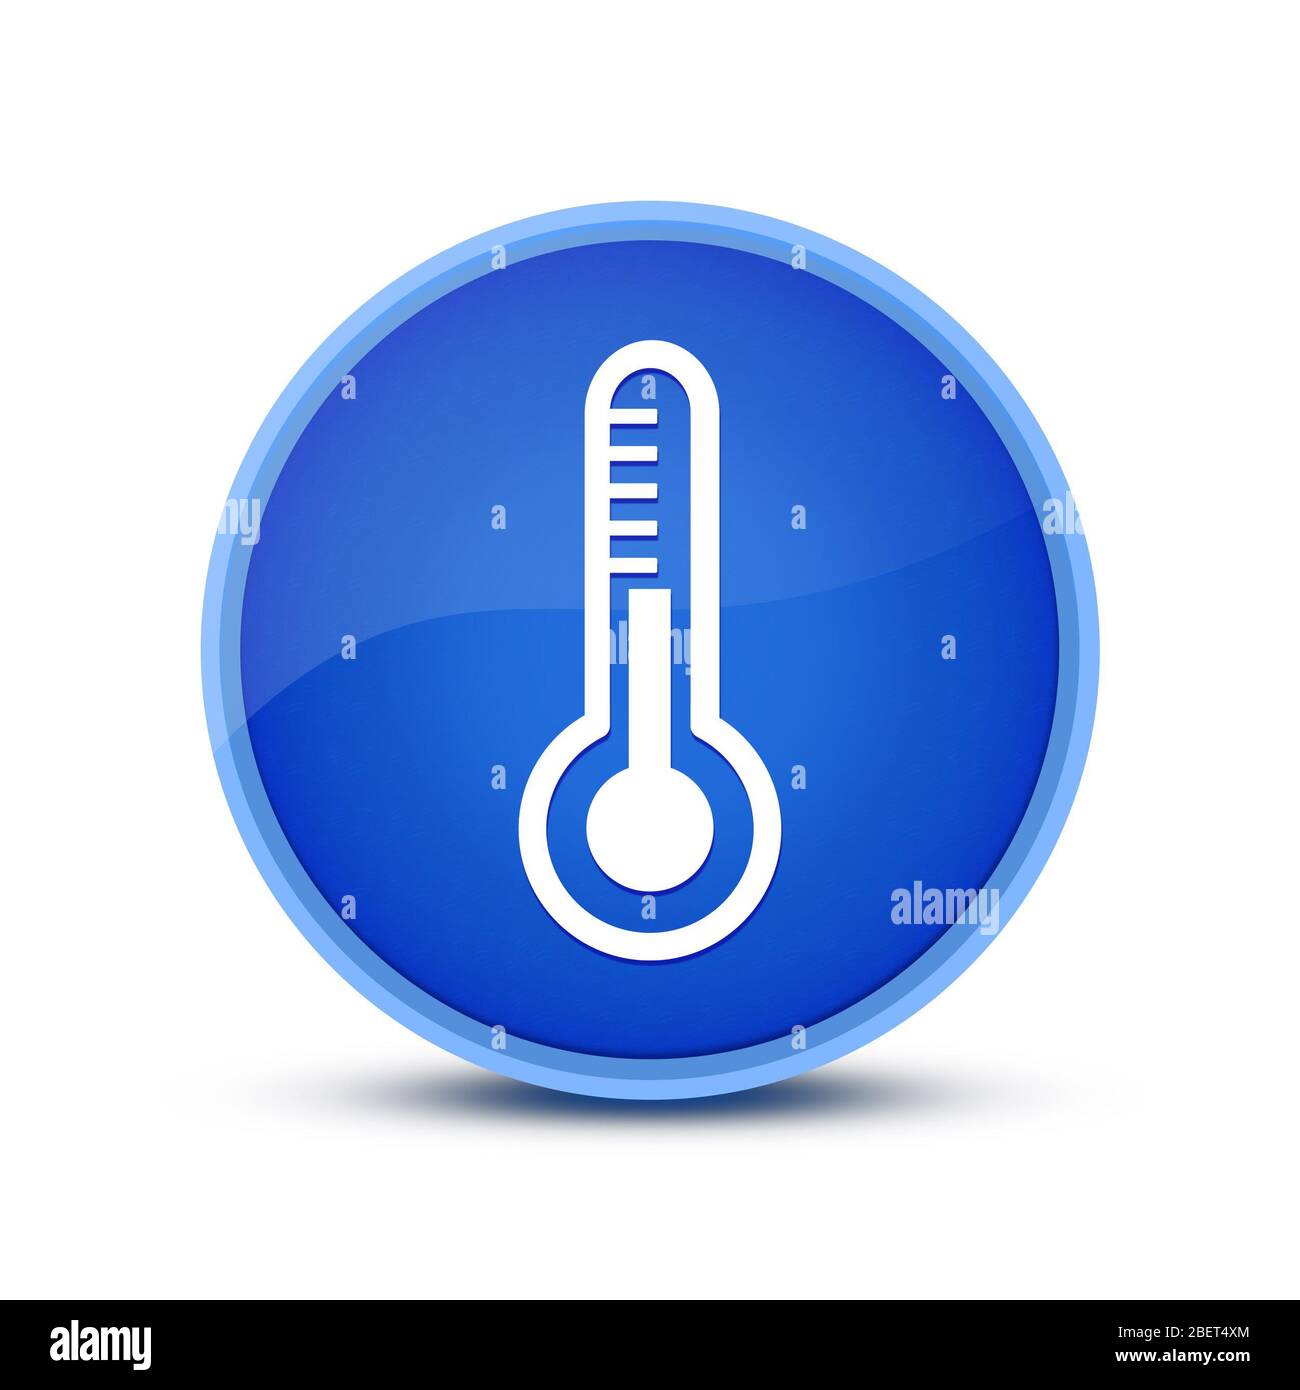 Thermometer icon isolated on special blue round button abstract illustration Stock Photo